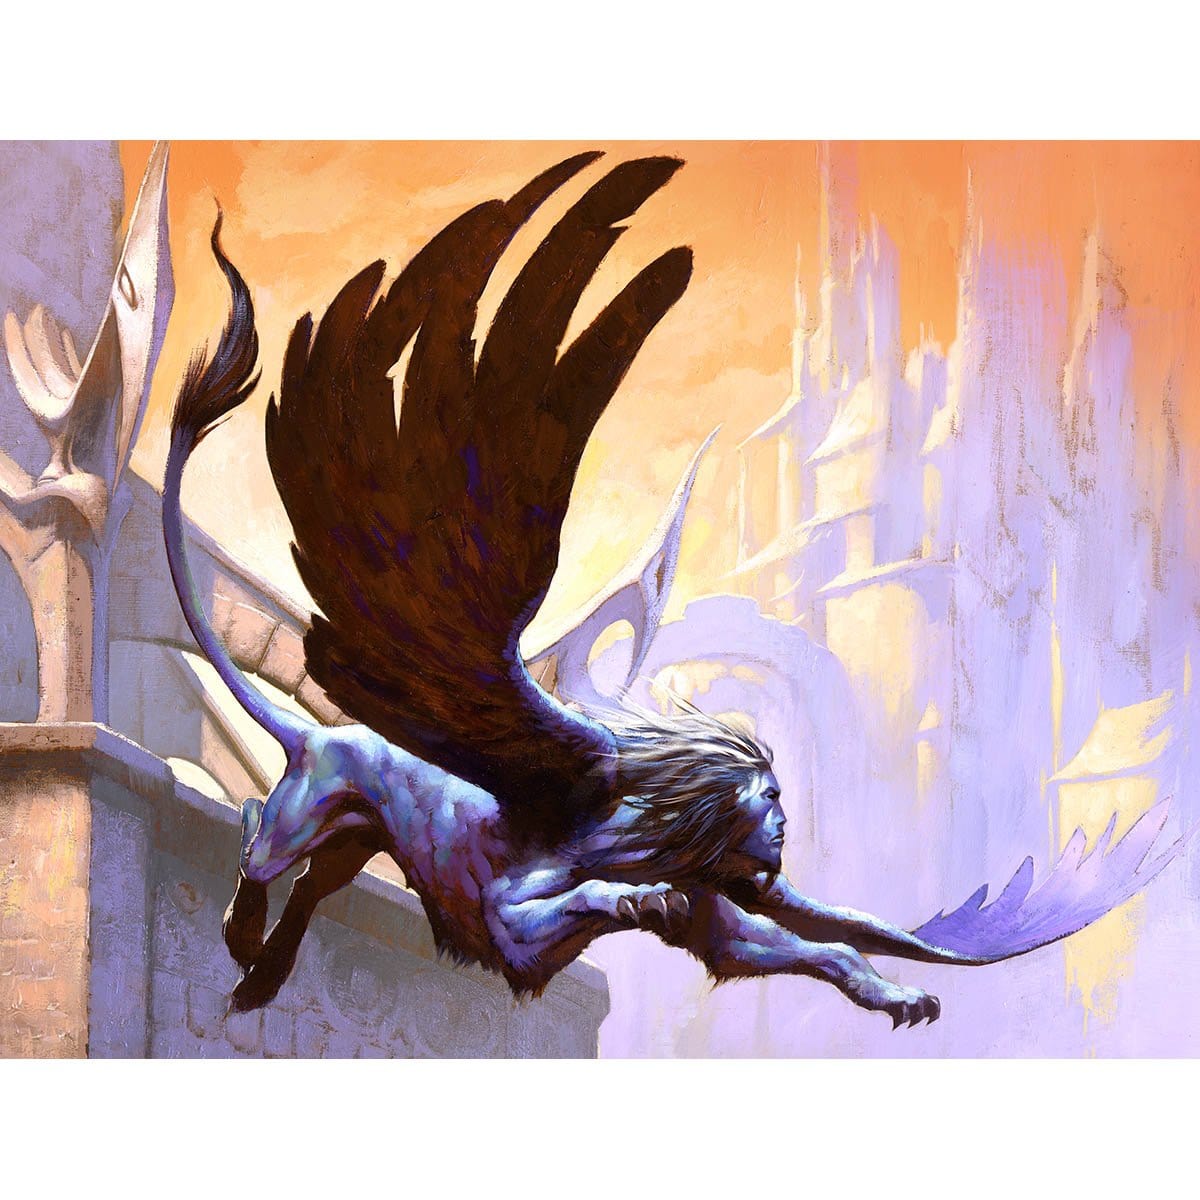 Cerulean Sphinx Print - Print - Original Magic Art - Accessories for Magic the Gathering and other card games